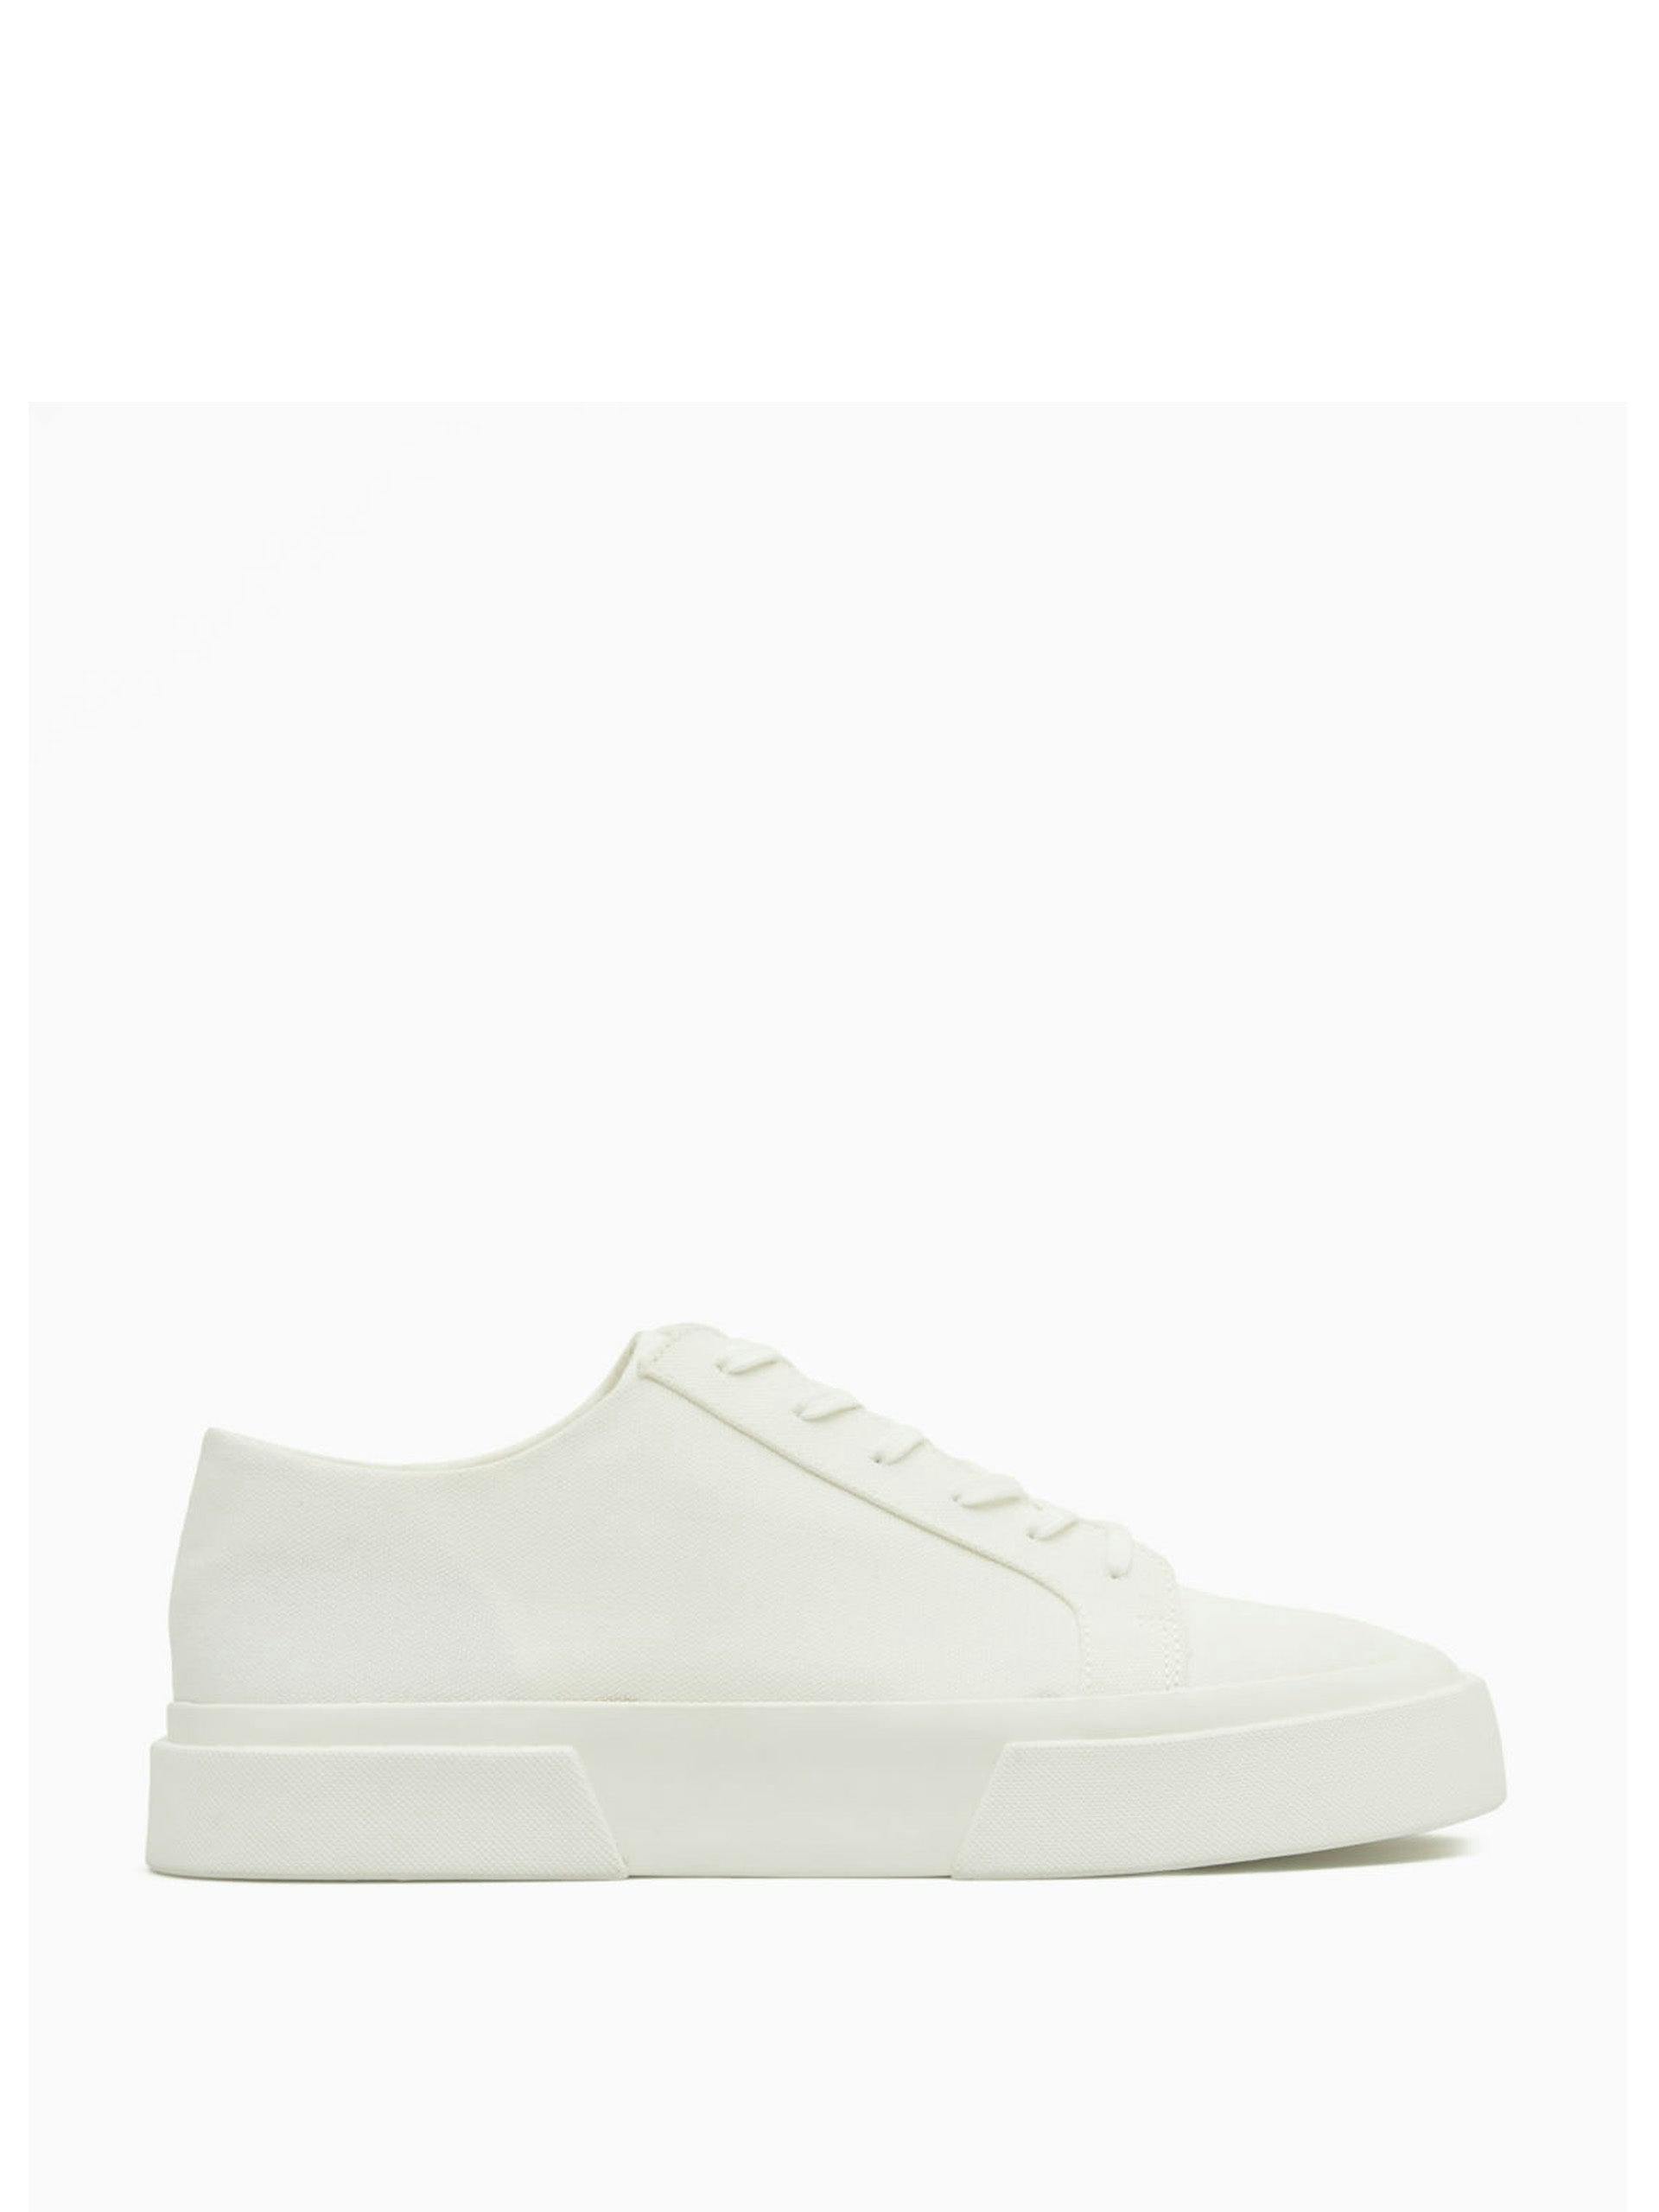 White canvas lace-up trainers